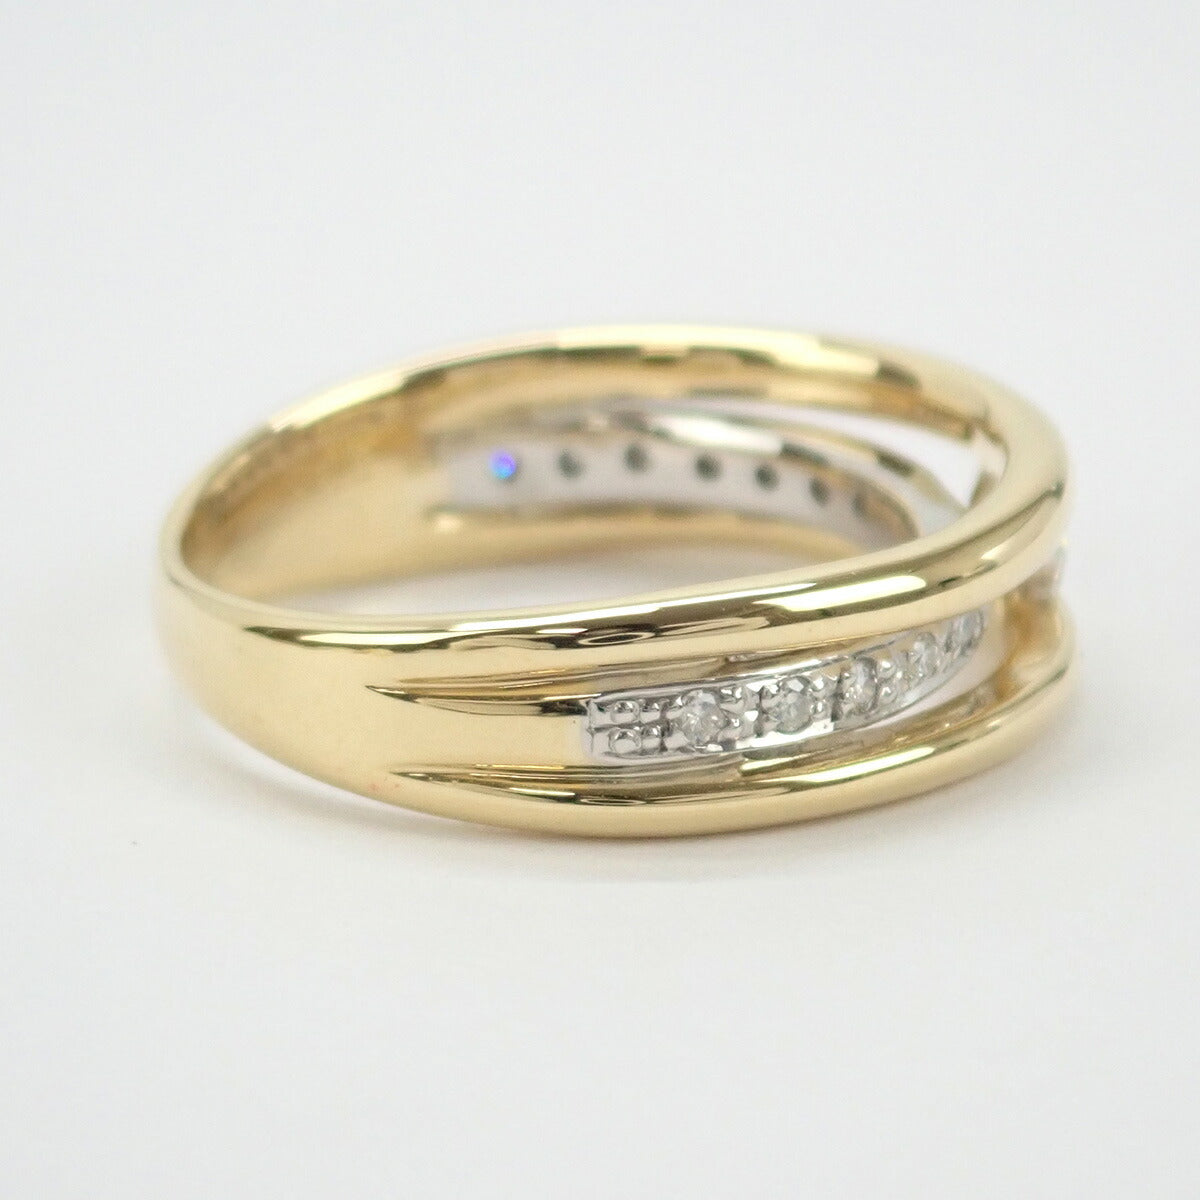 [LuxUness]  K18YG & Pt900 Designer Diamond Ring 0.20ct, Yellow Gold and Size 8.5, Ladies (Pre-owned) in Excellent condition